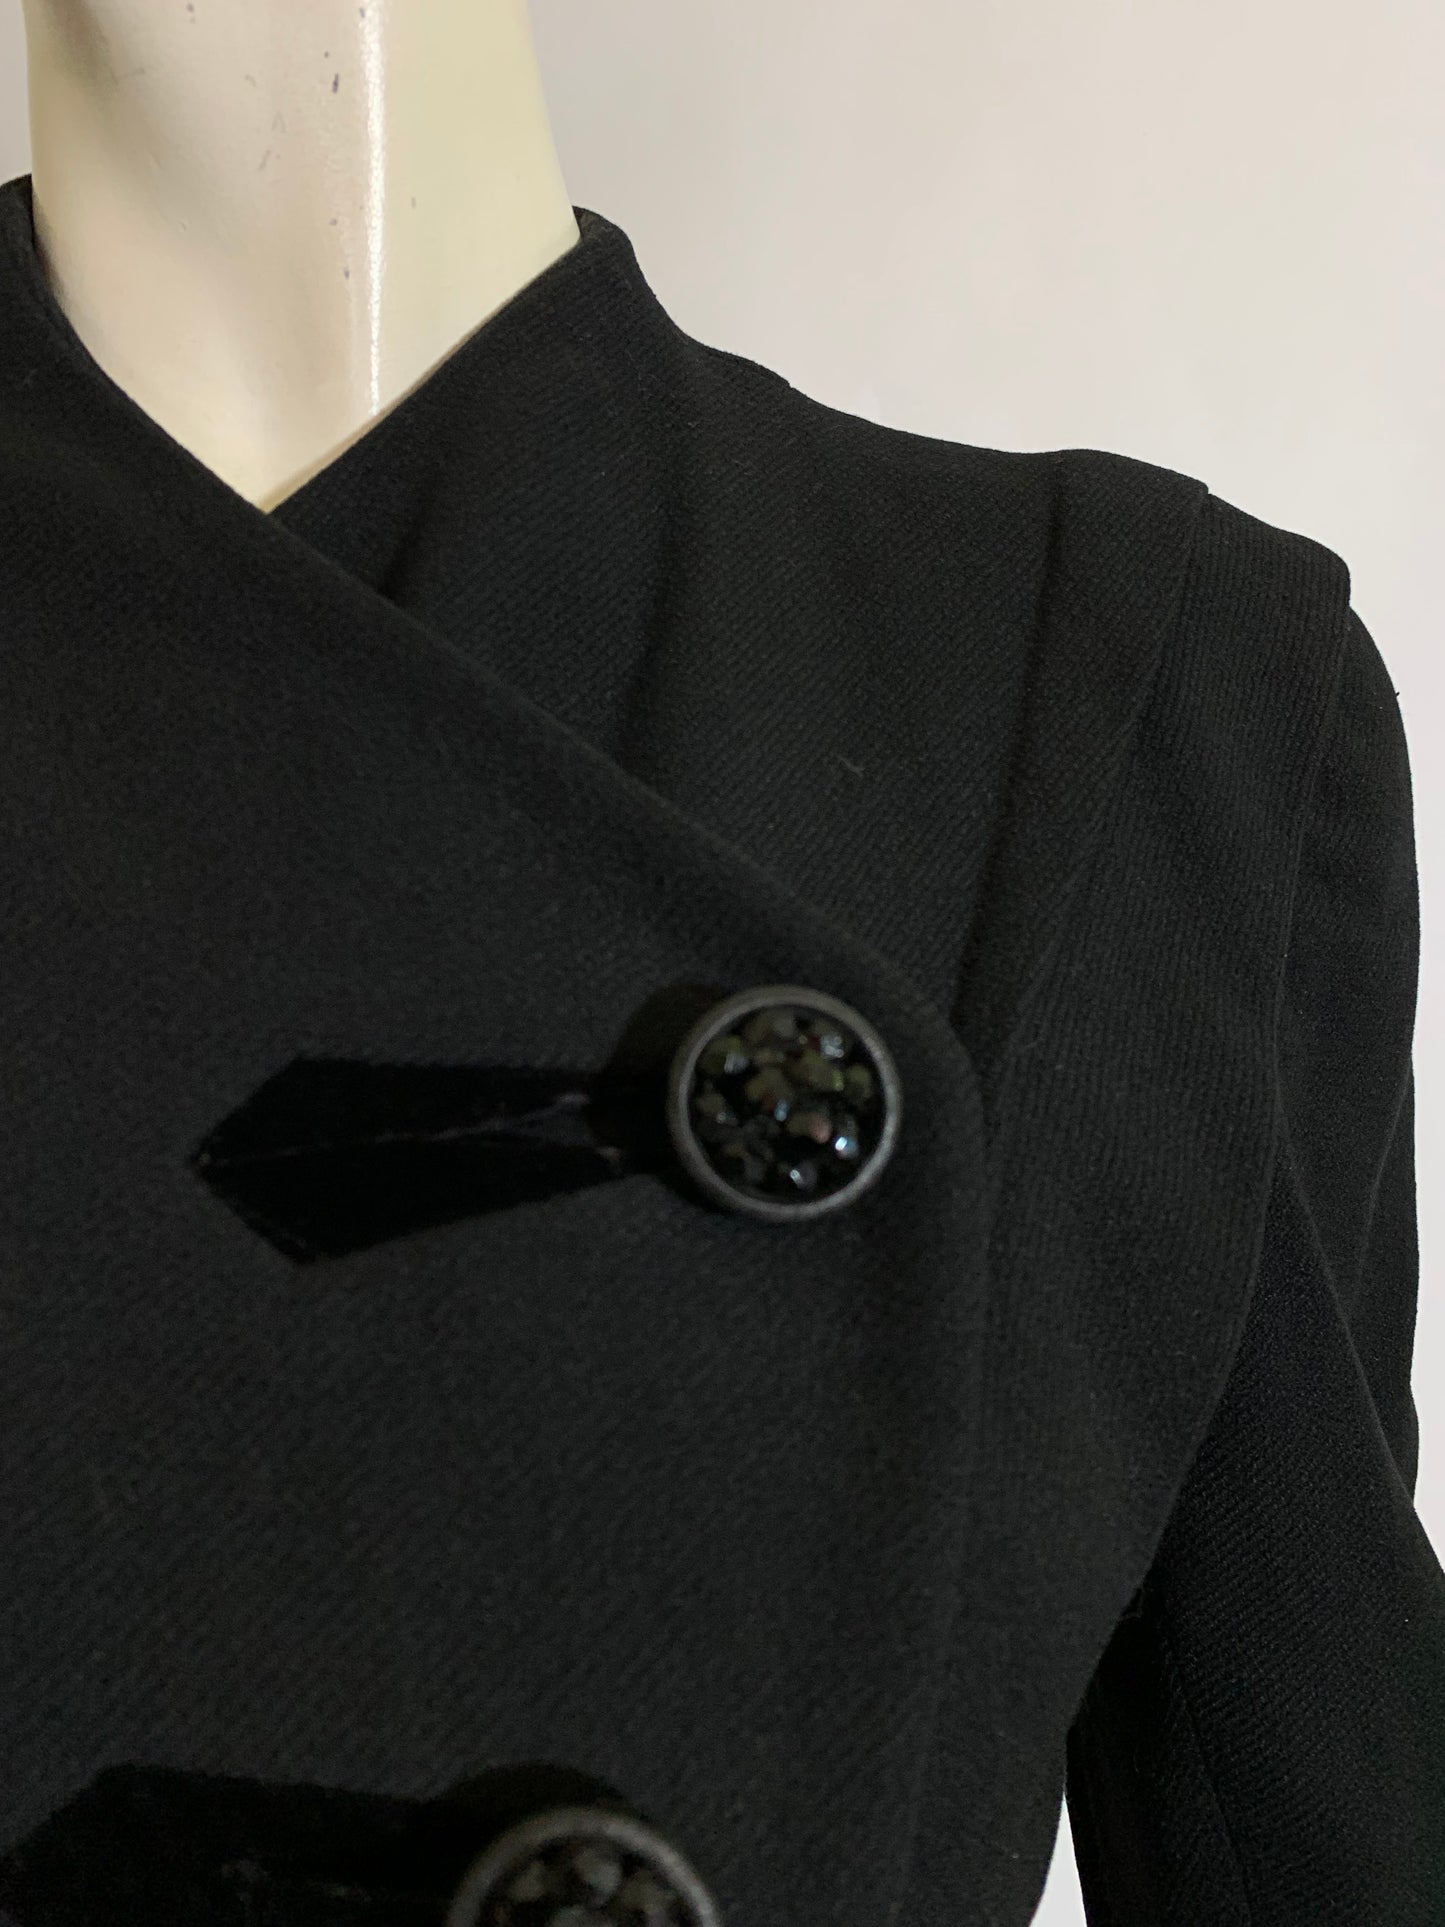 Panther Black Wool Nipped Waist Suit Jacket with Velvet Buttonholes and Bejeweled Buttons circa 1940s